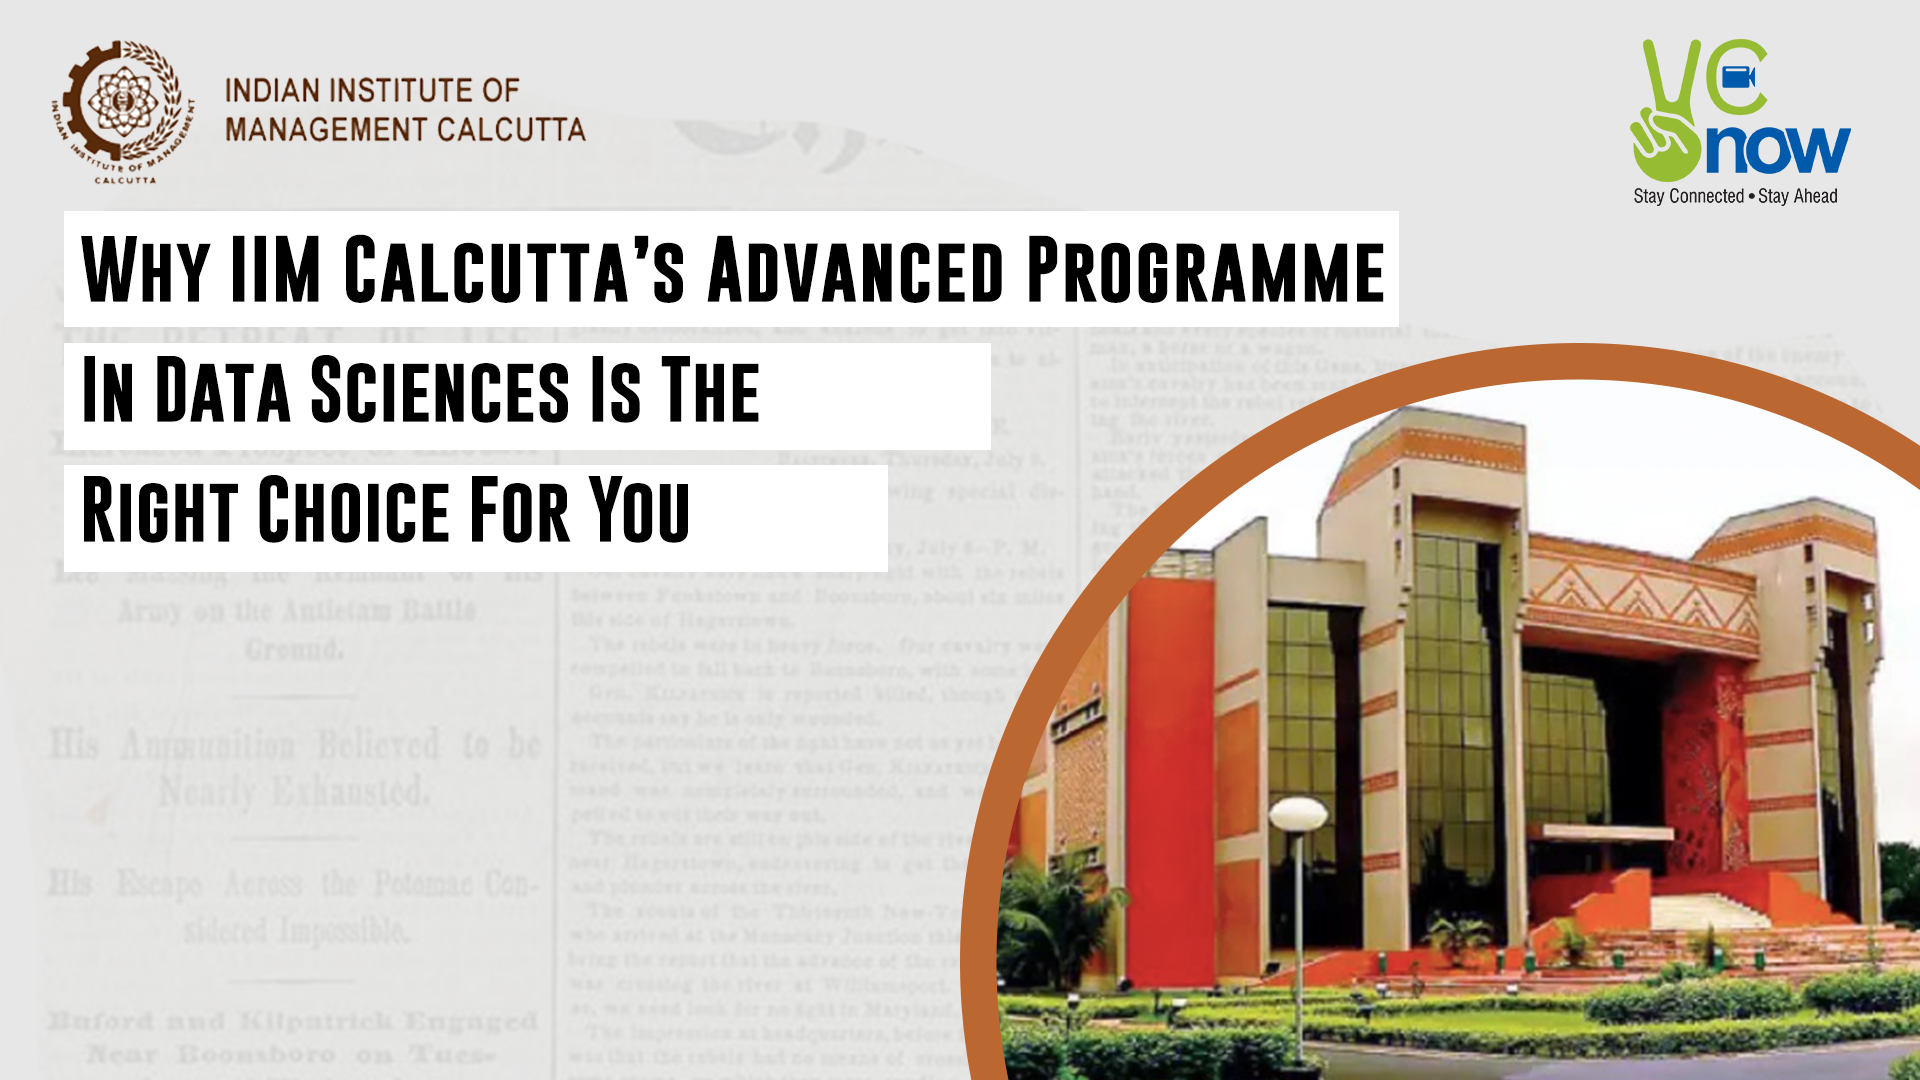 Why IIM Calcutta’s Advanced Programme In Data Sciences Is The Right Choice For You